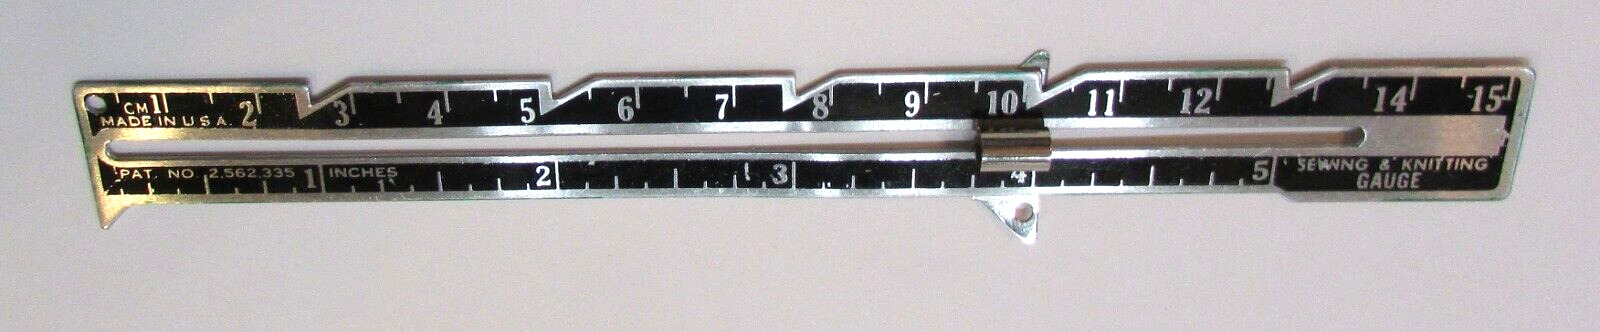 Vintage 1970\'s USA Aluminum 6” Sewing and Knitting Gauge Centimeters and Inches